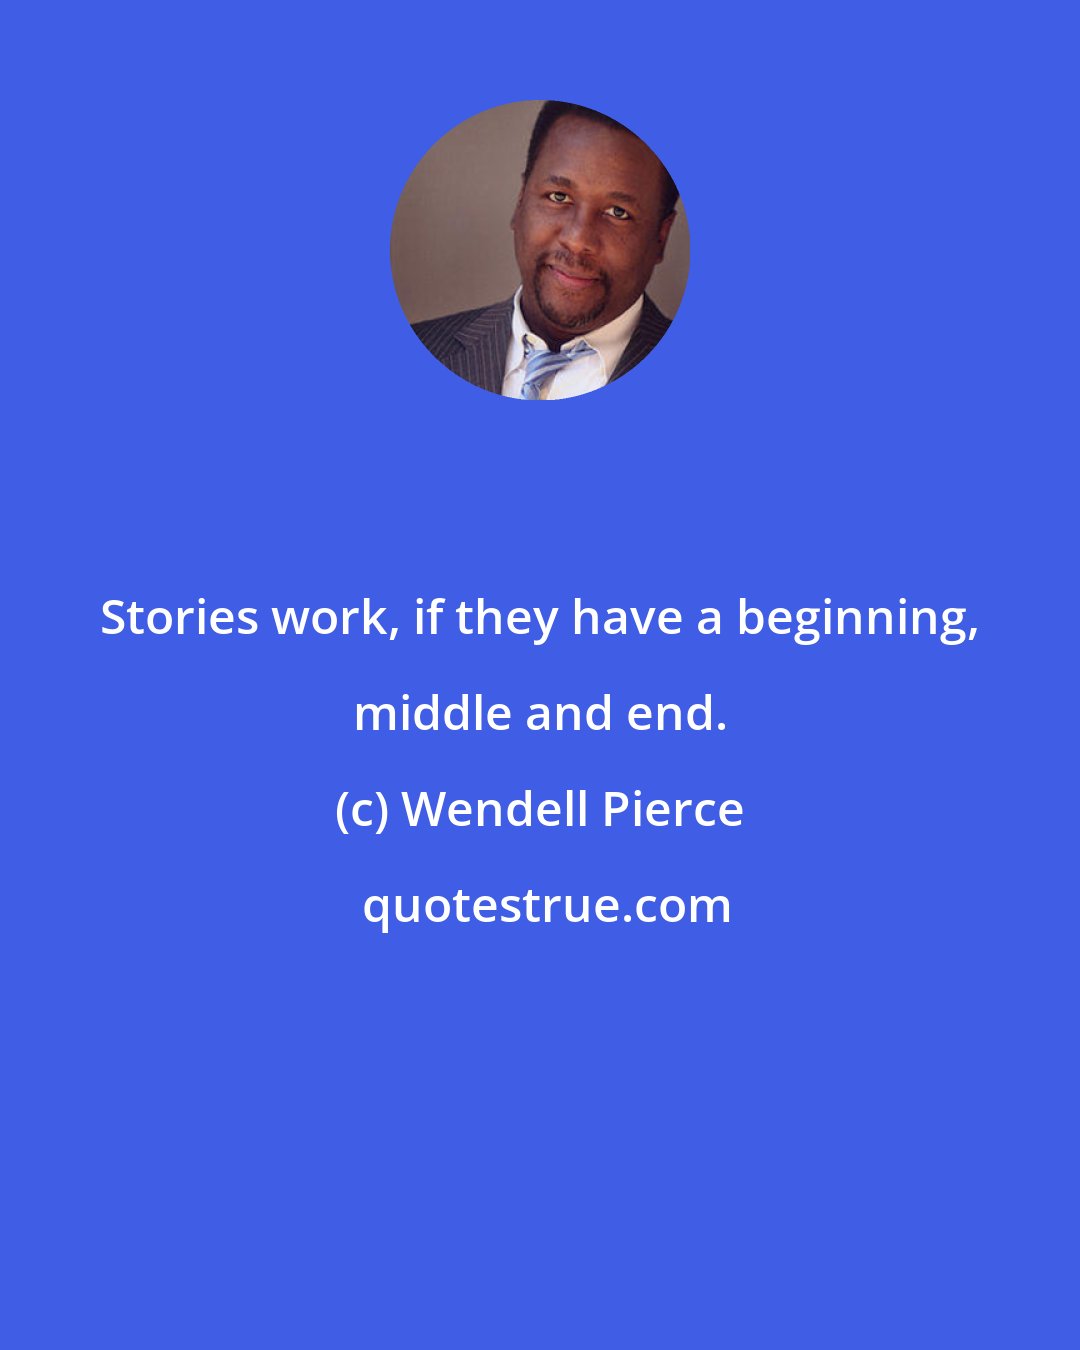 Wendell Pierce: Stories work, if they have a beginning, middle and end.